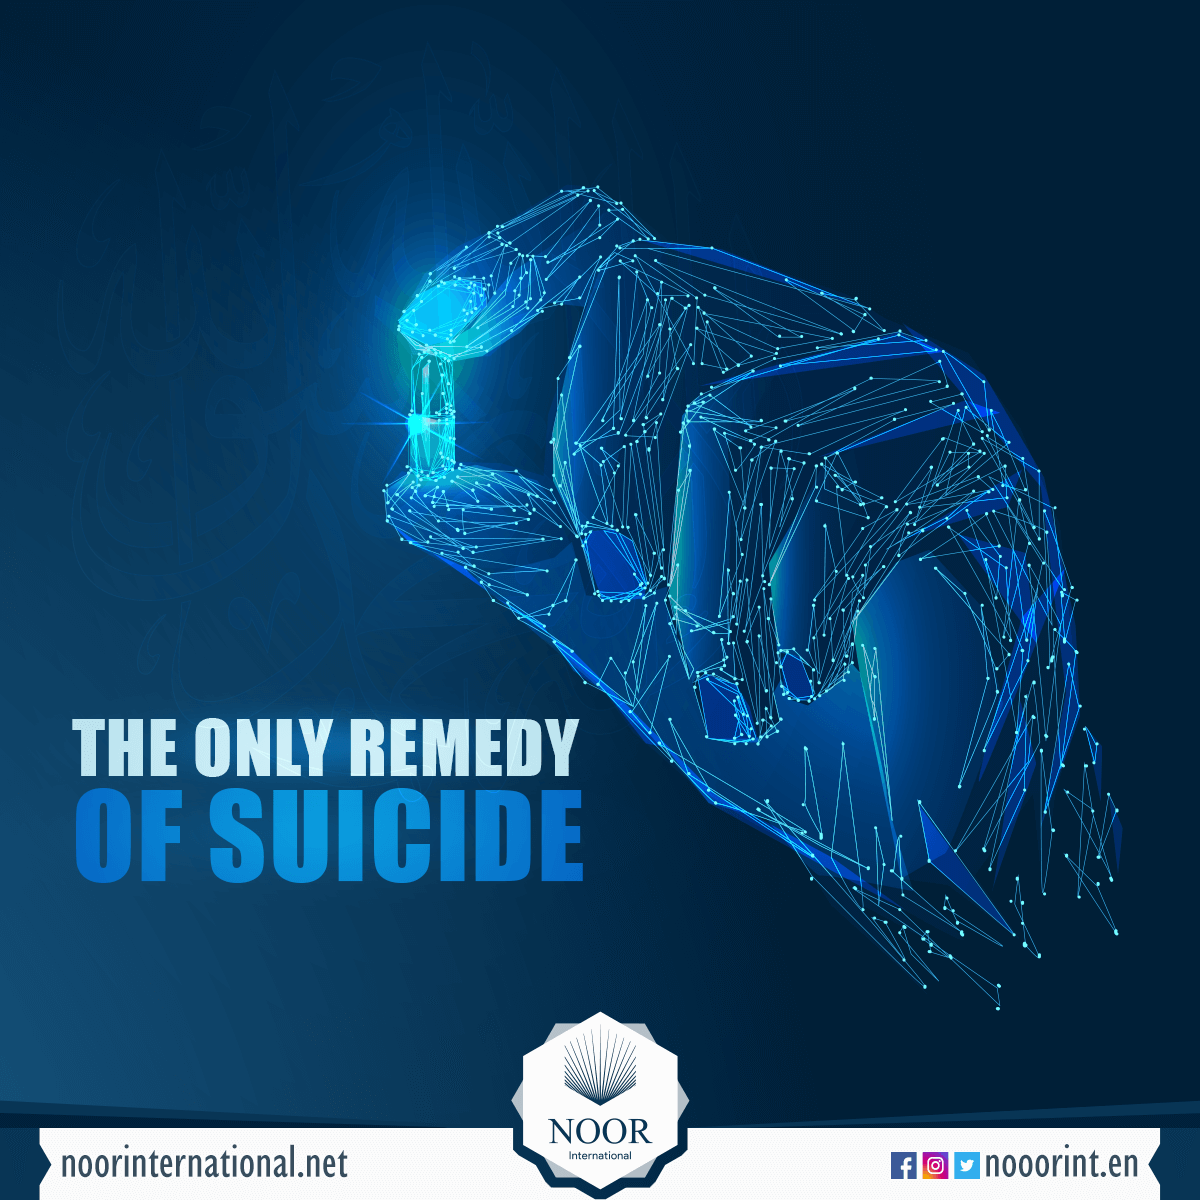 The only remedy of suicide